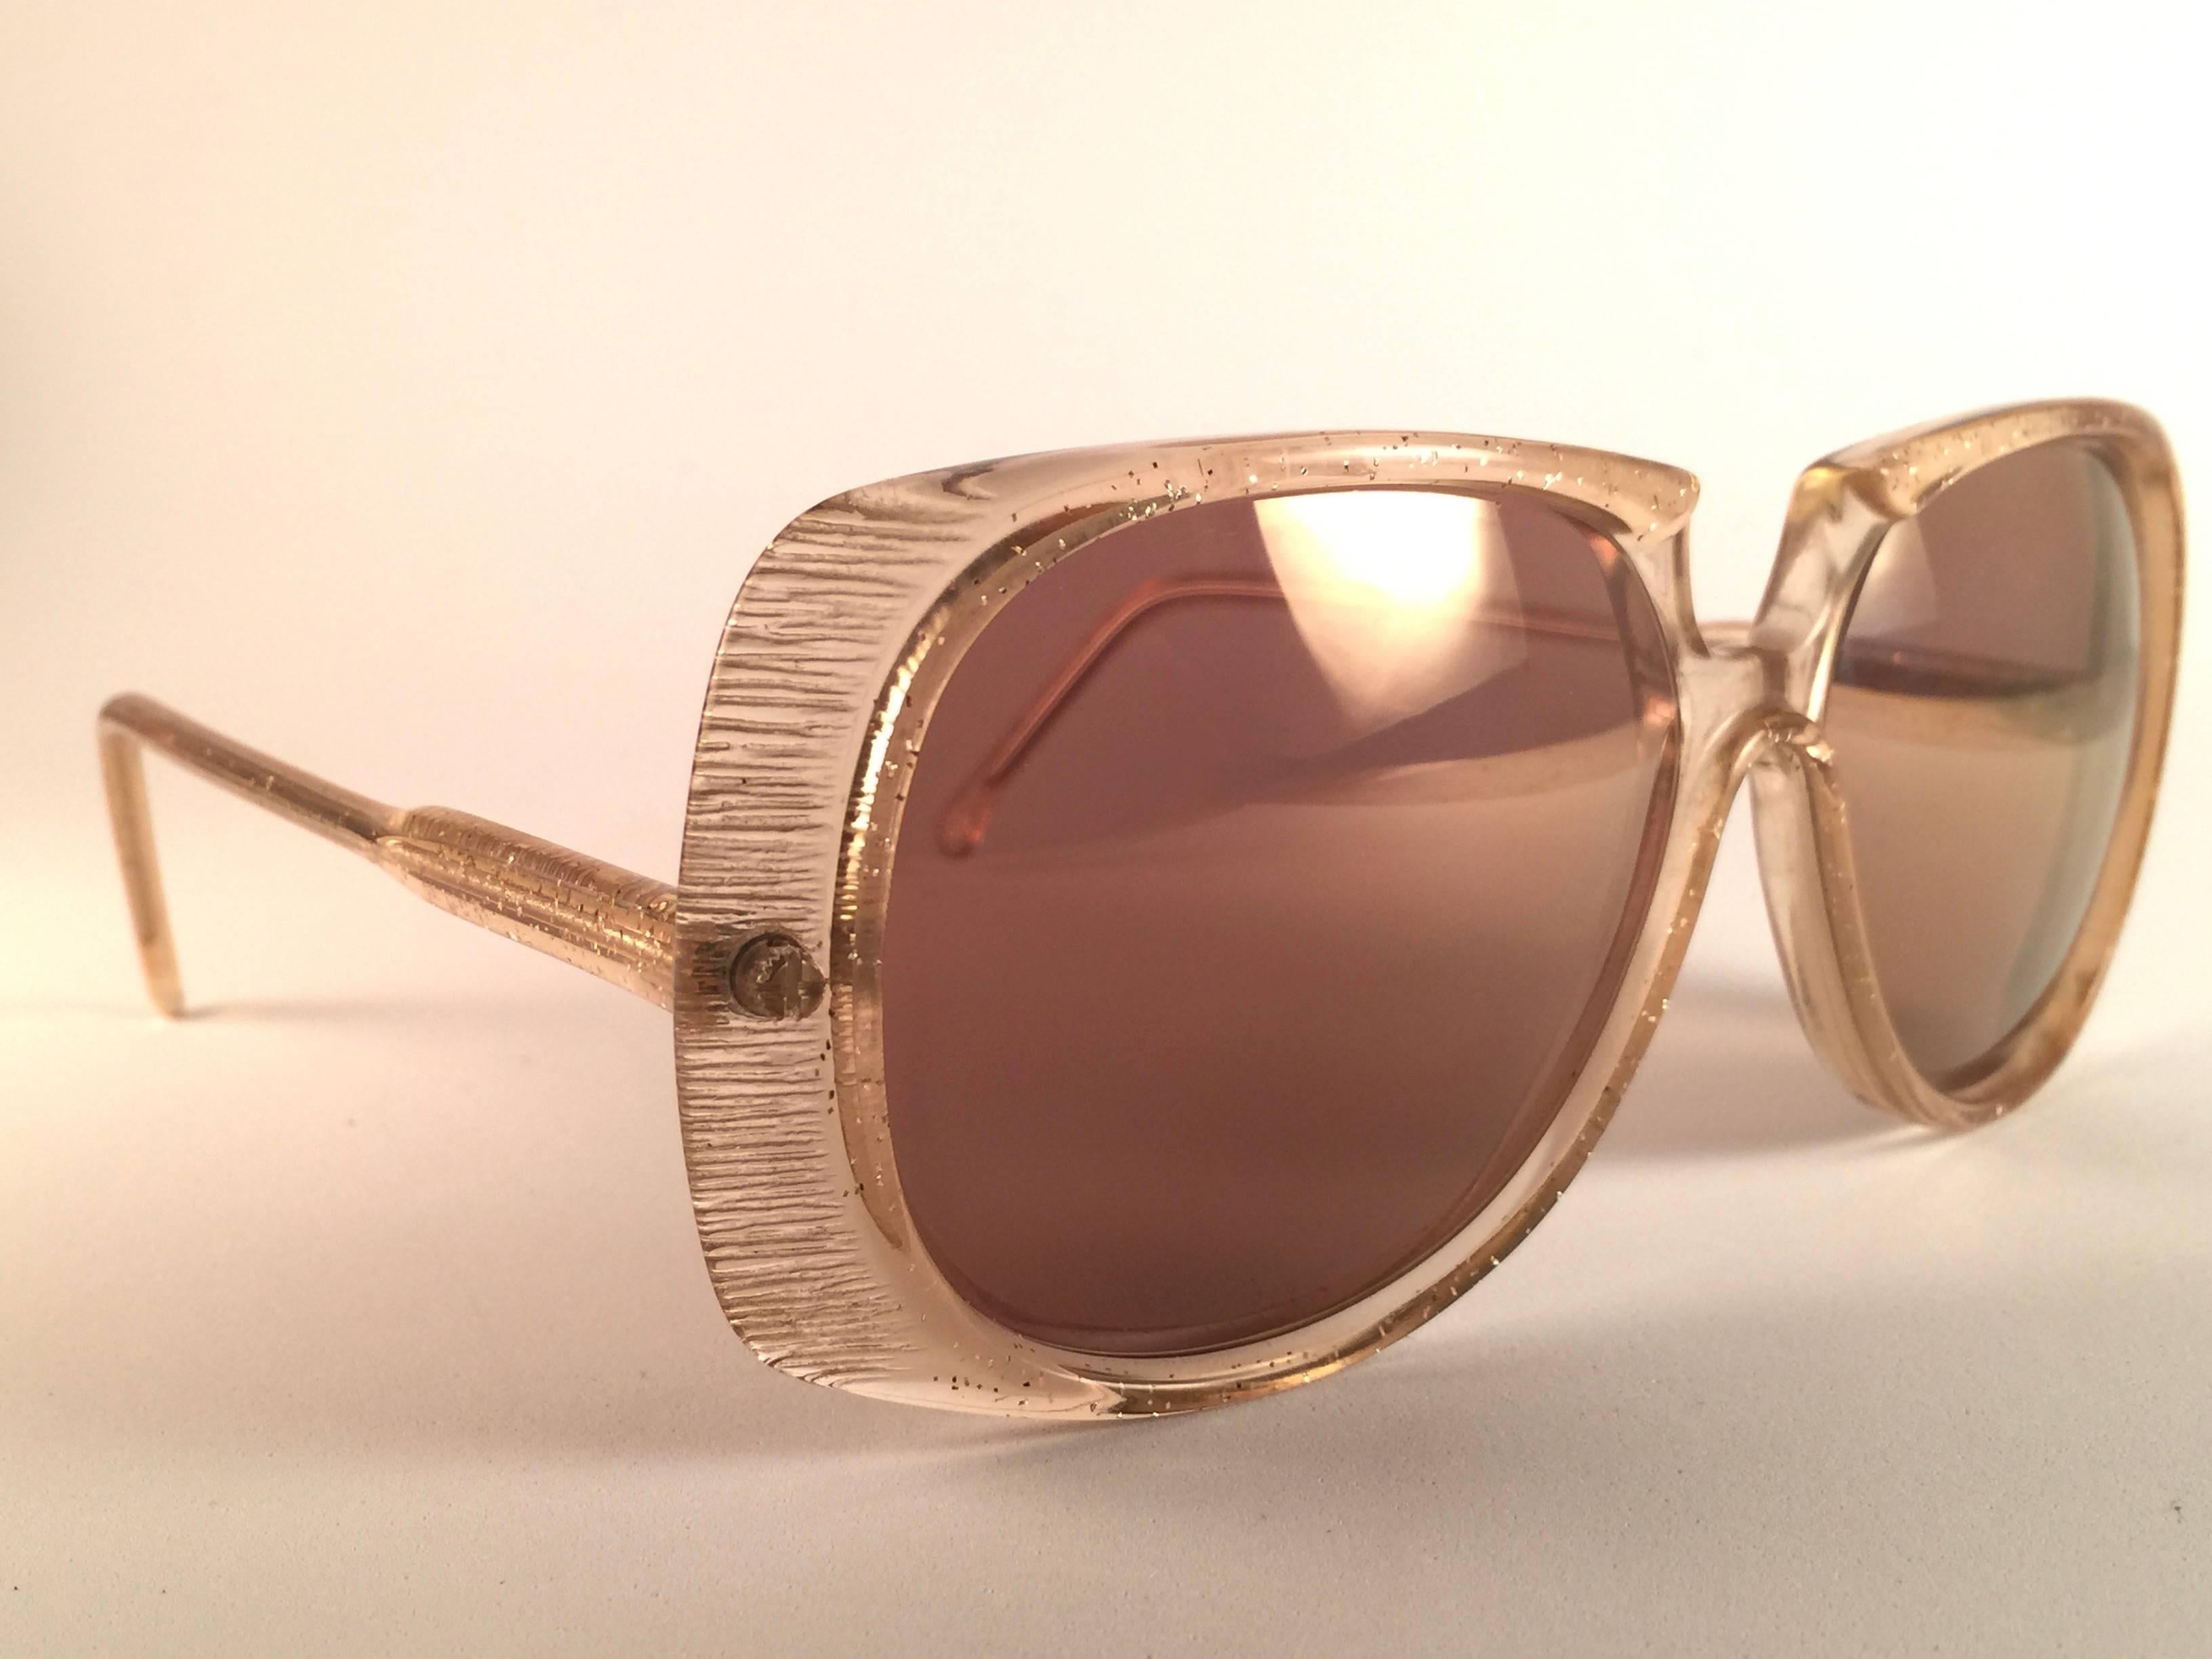 Superb & rare pair of Oliver Goldsmith sunglasses. Oversized clear frame delicate gold accents frame holding a pair of spotless gold lenses.   

New, never worn or displayed. This pair may have minor sign of wear due to storage.

Handmade in England.